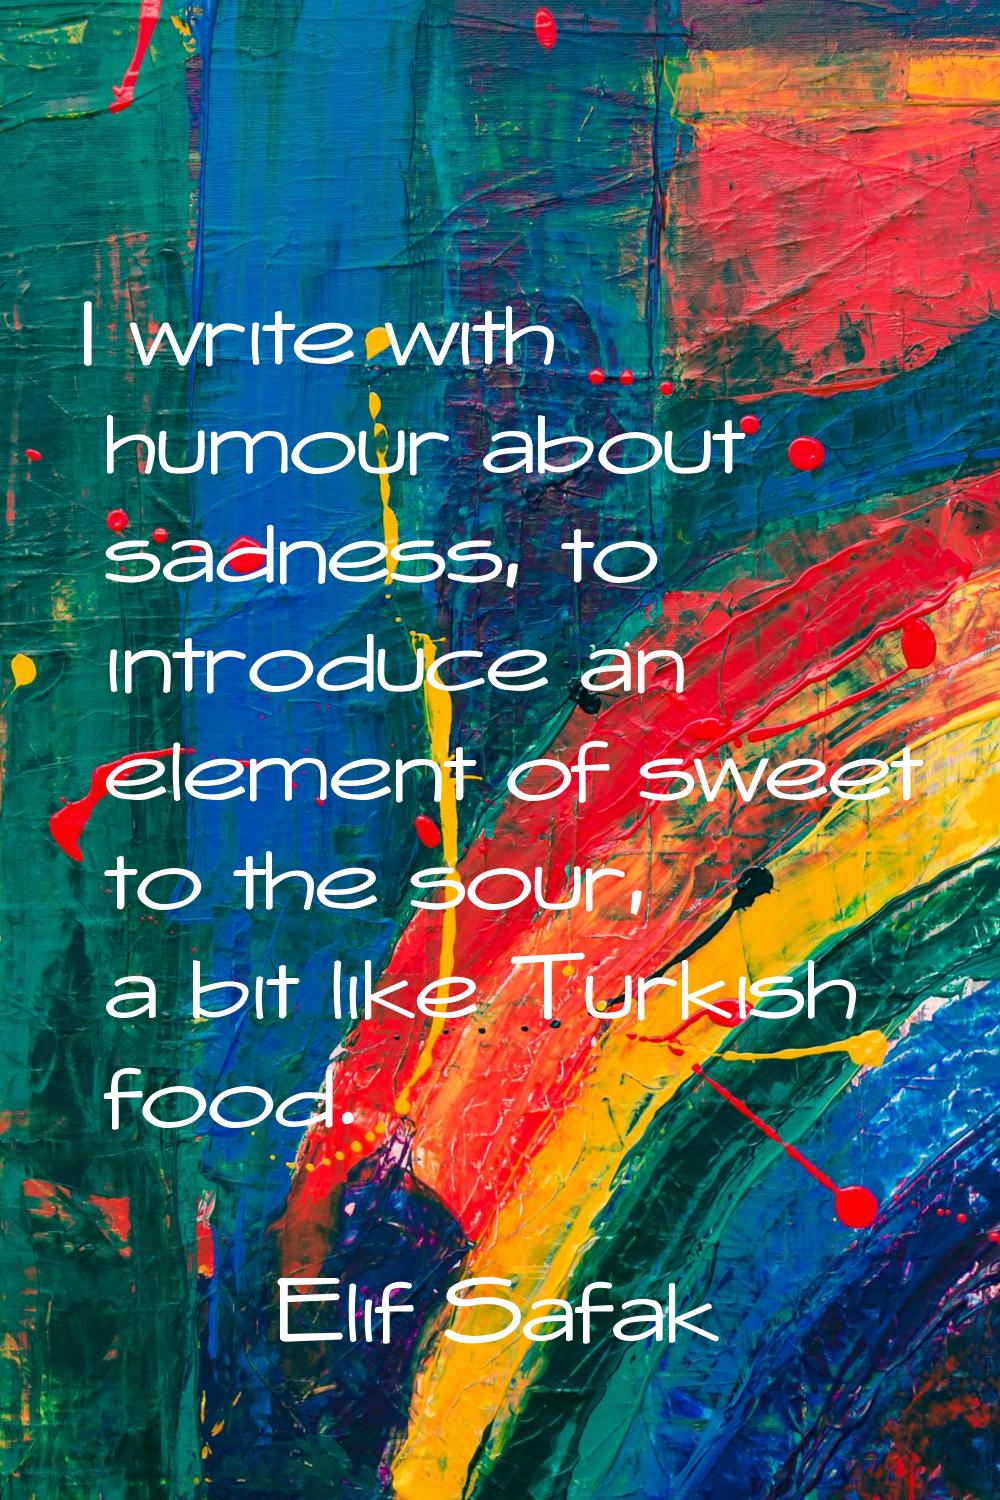 I write with humour about sadness, to introduce an element of sweet to the sour, a bit like Turkish